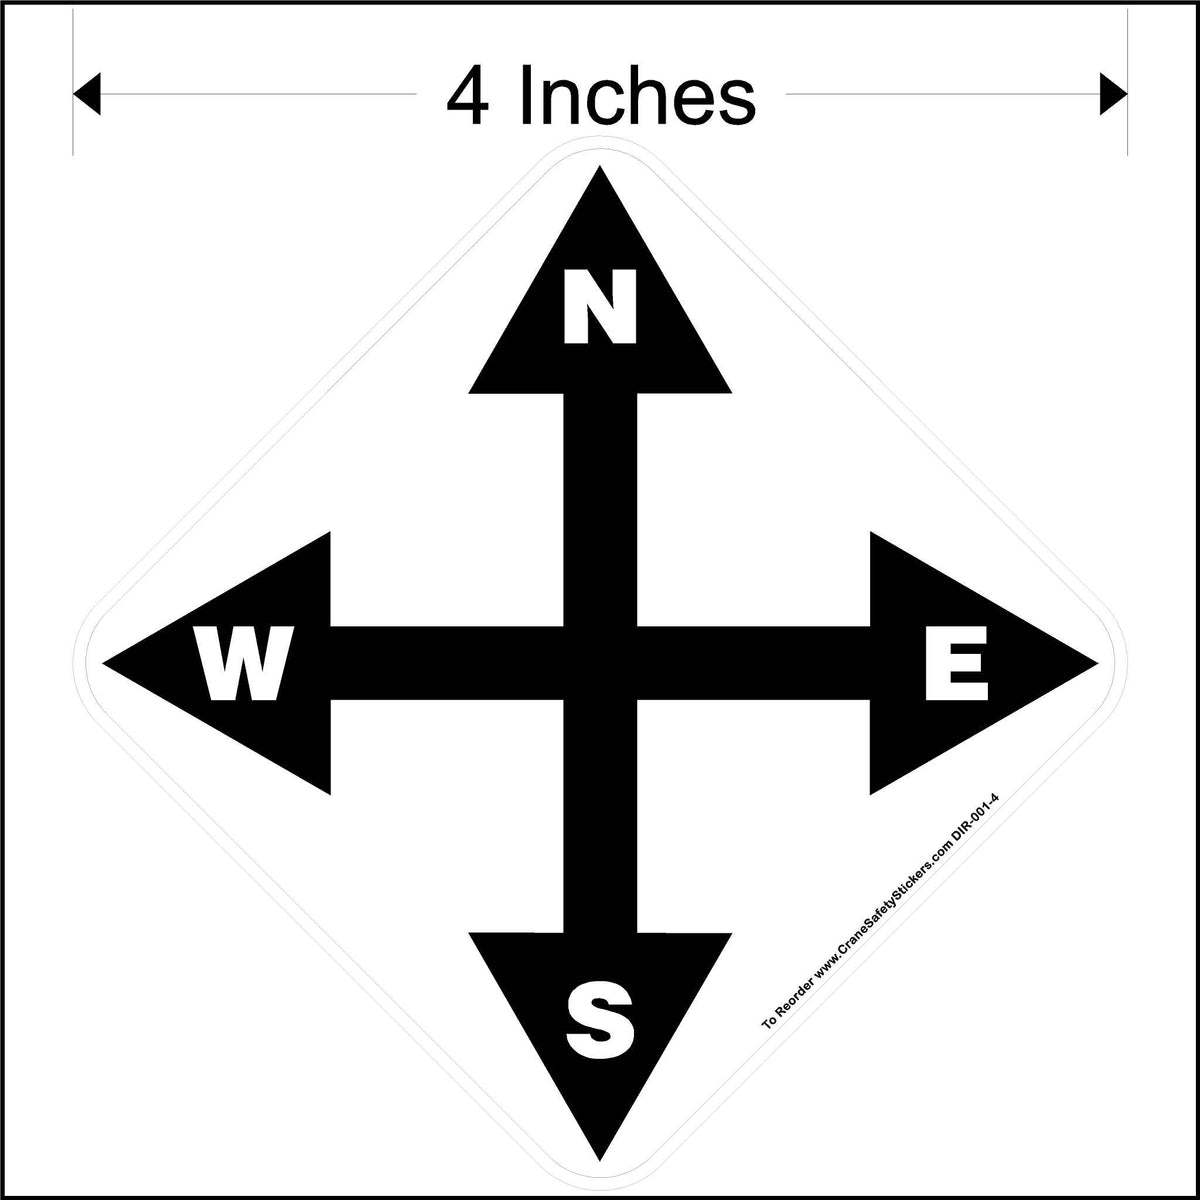 4 Inch North South East West Overhead Crane Directional Decal.